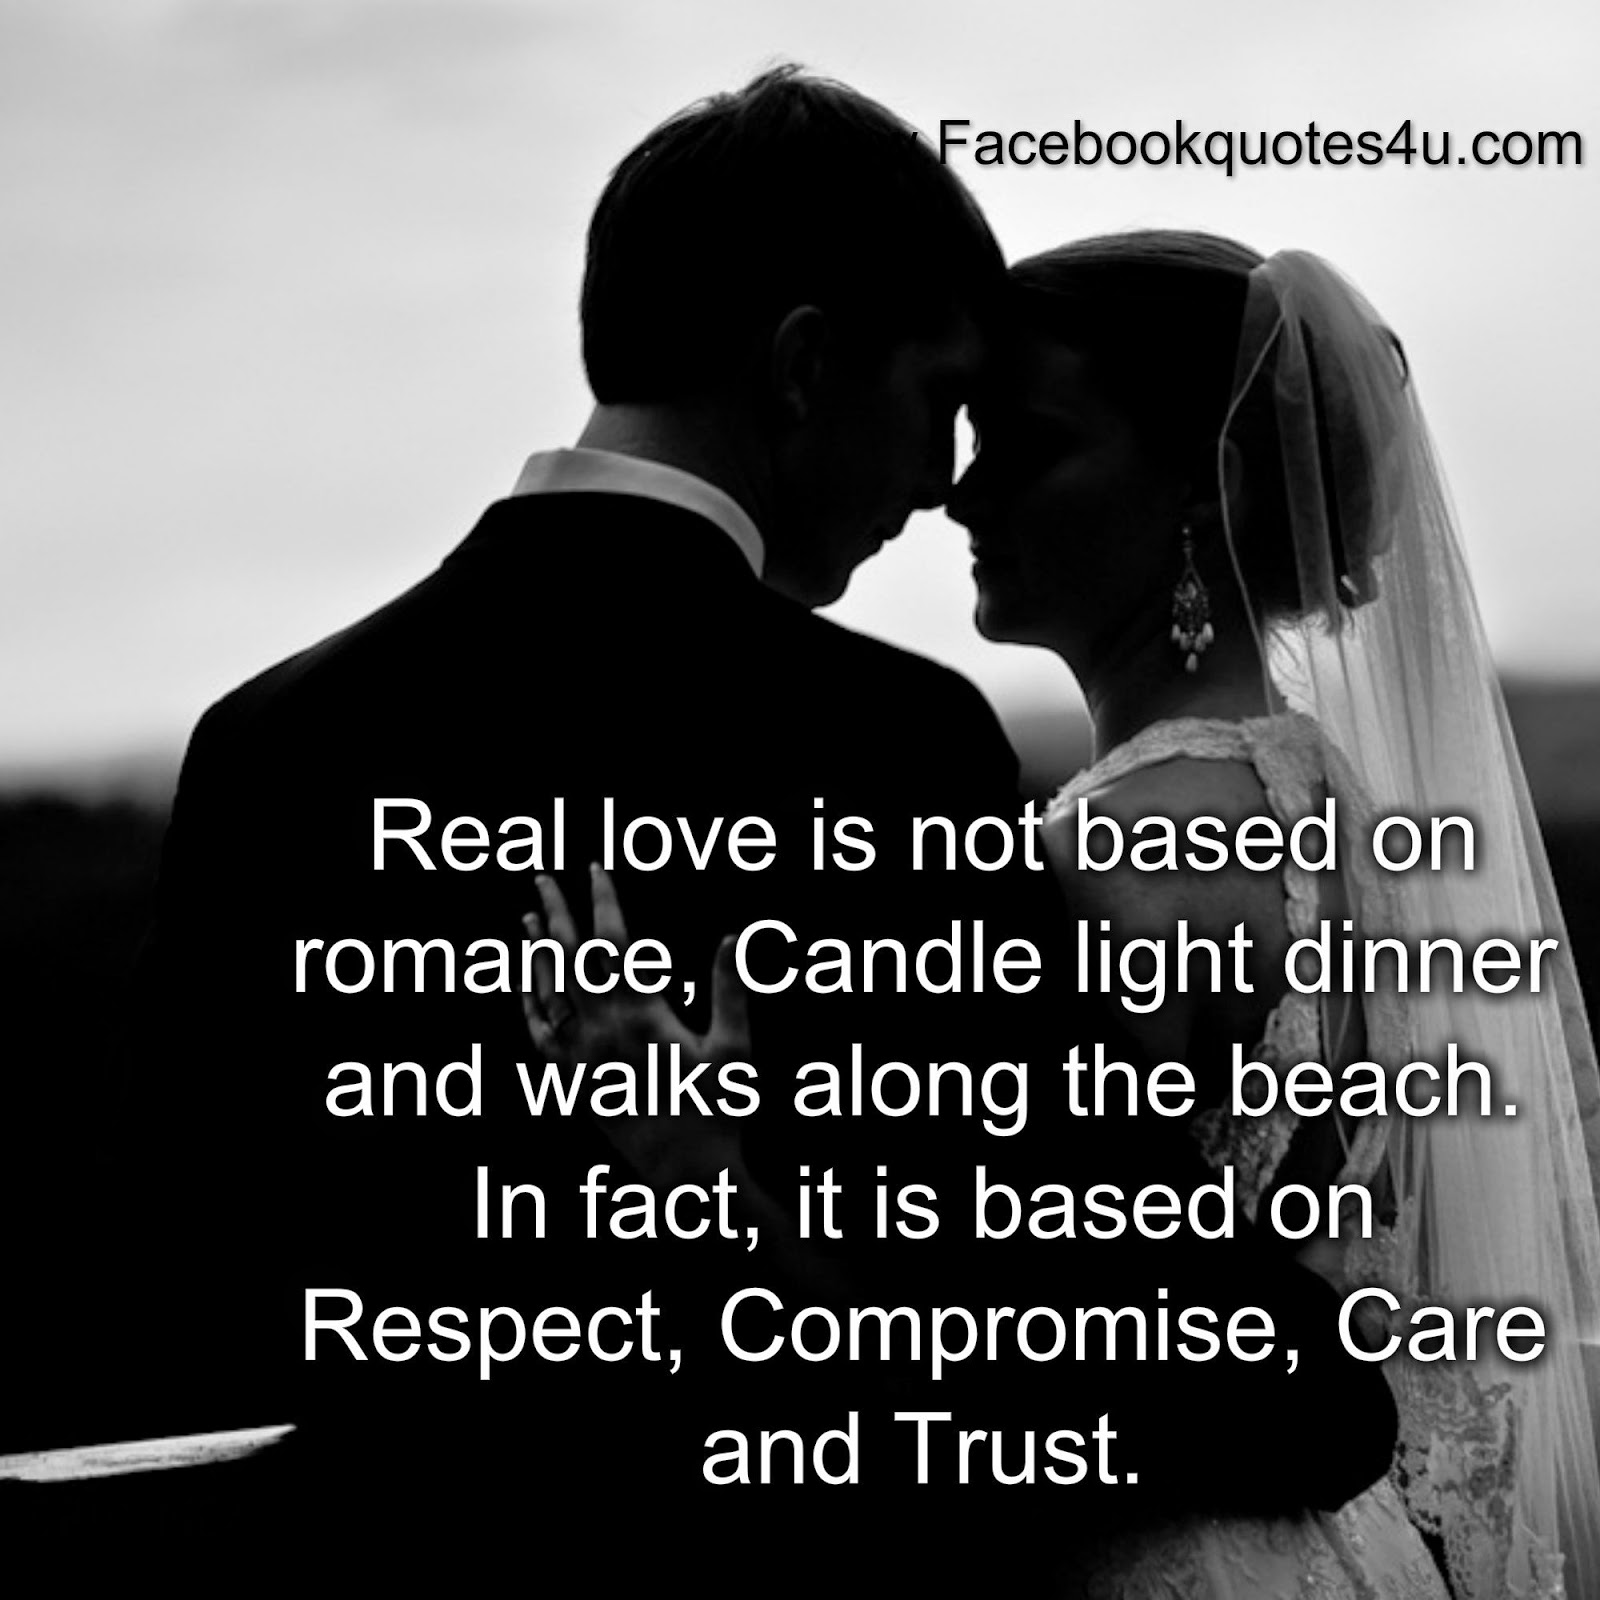 Real love is not based on romance